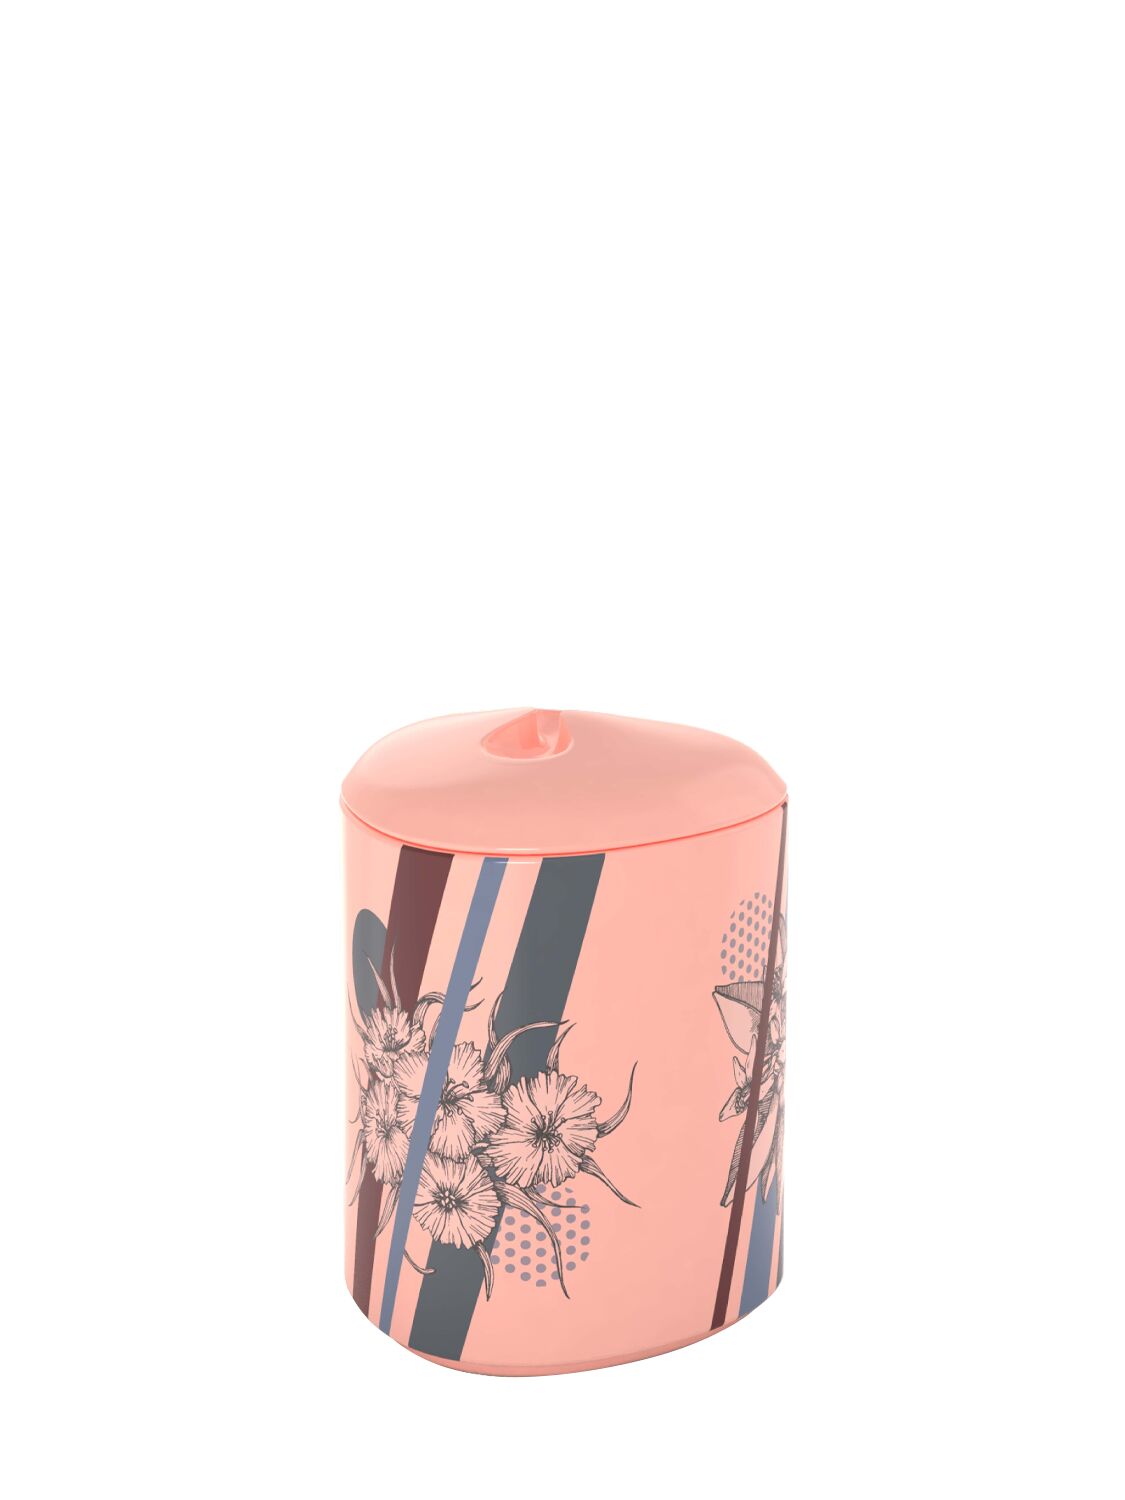 Essensitive 320gr Zyz Candle In Pink